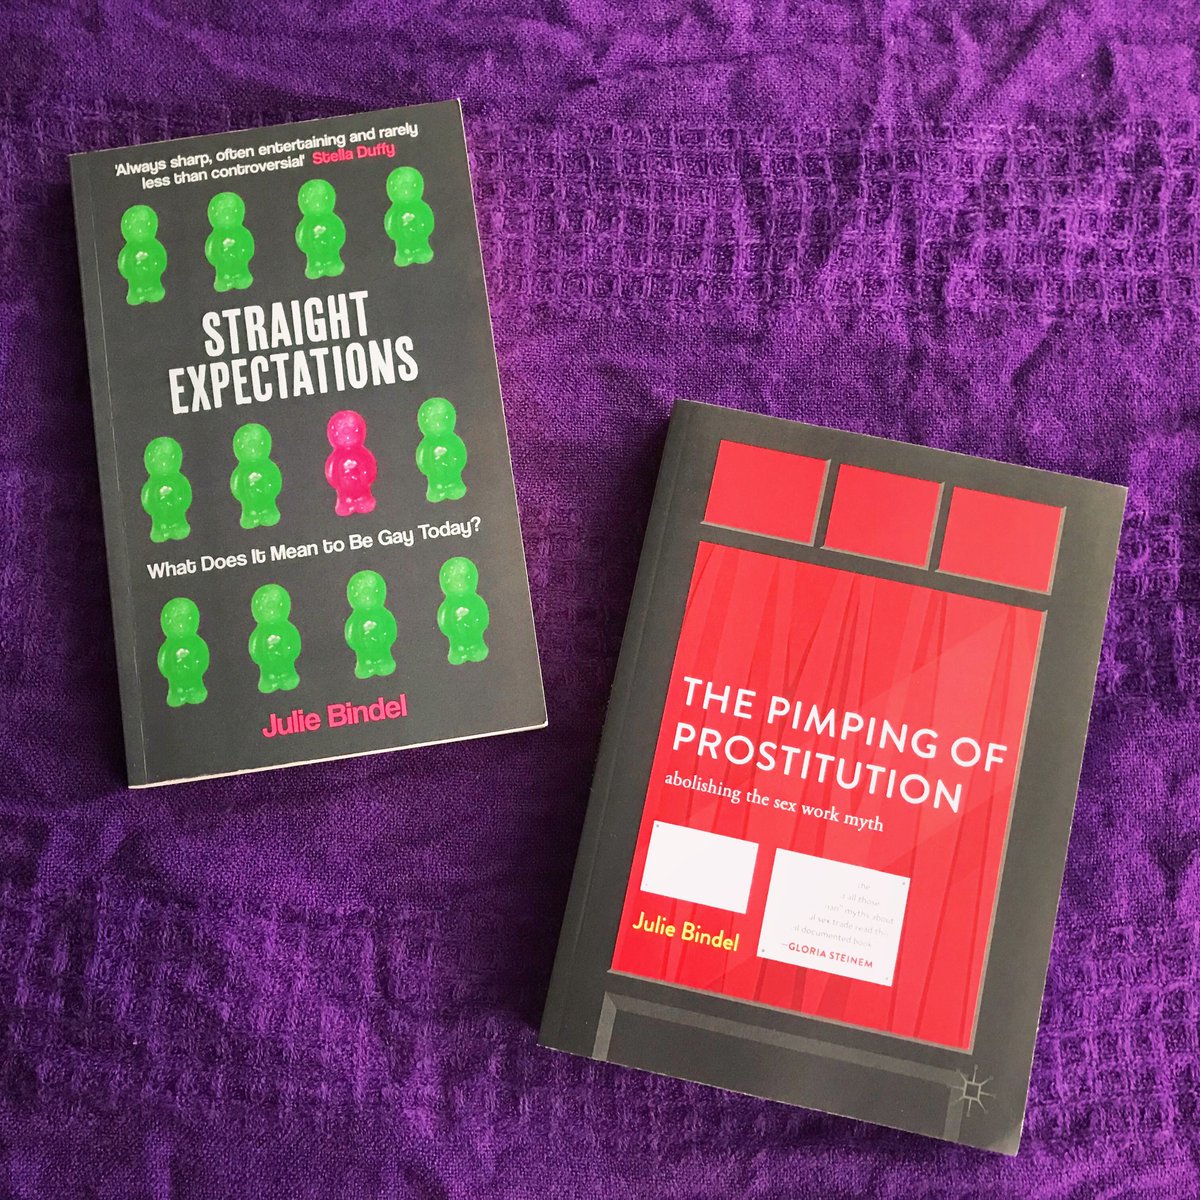  Straight Expectations, by  @bindelj. A fierce challenge to homophobia, compulsory heterosexuality, and depoliticisation of lesbian community. The Pimping of Prostitution. A critique of the sex industry, built in the intersection of capitalism & patriarchy. Powerful research